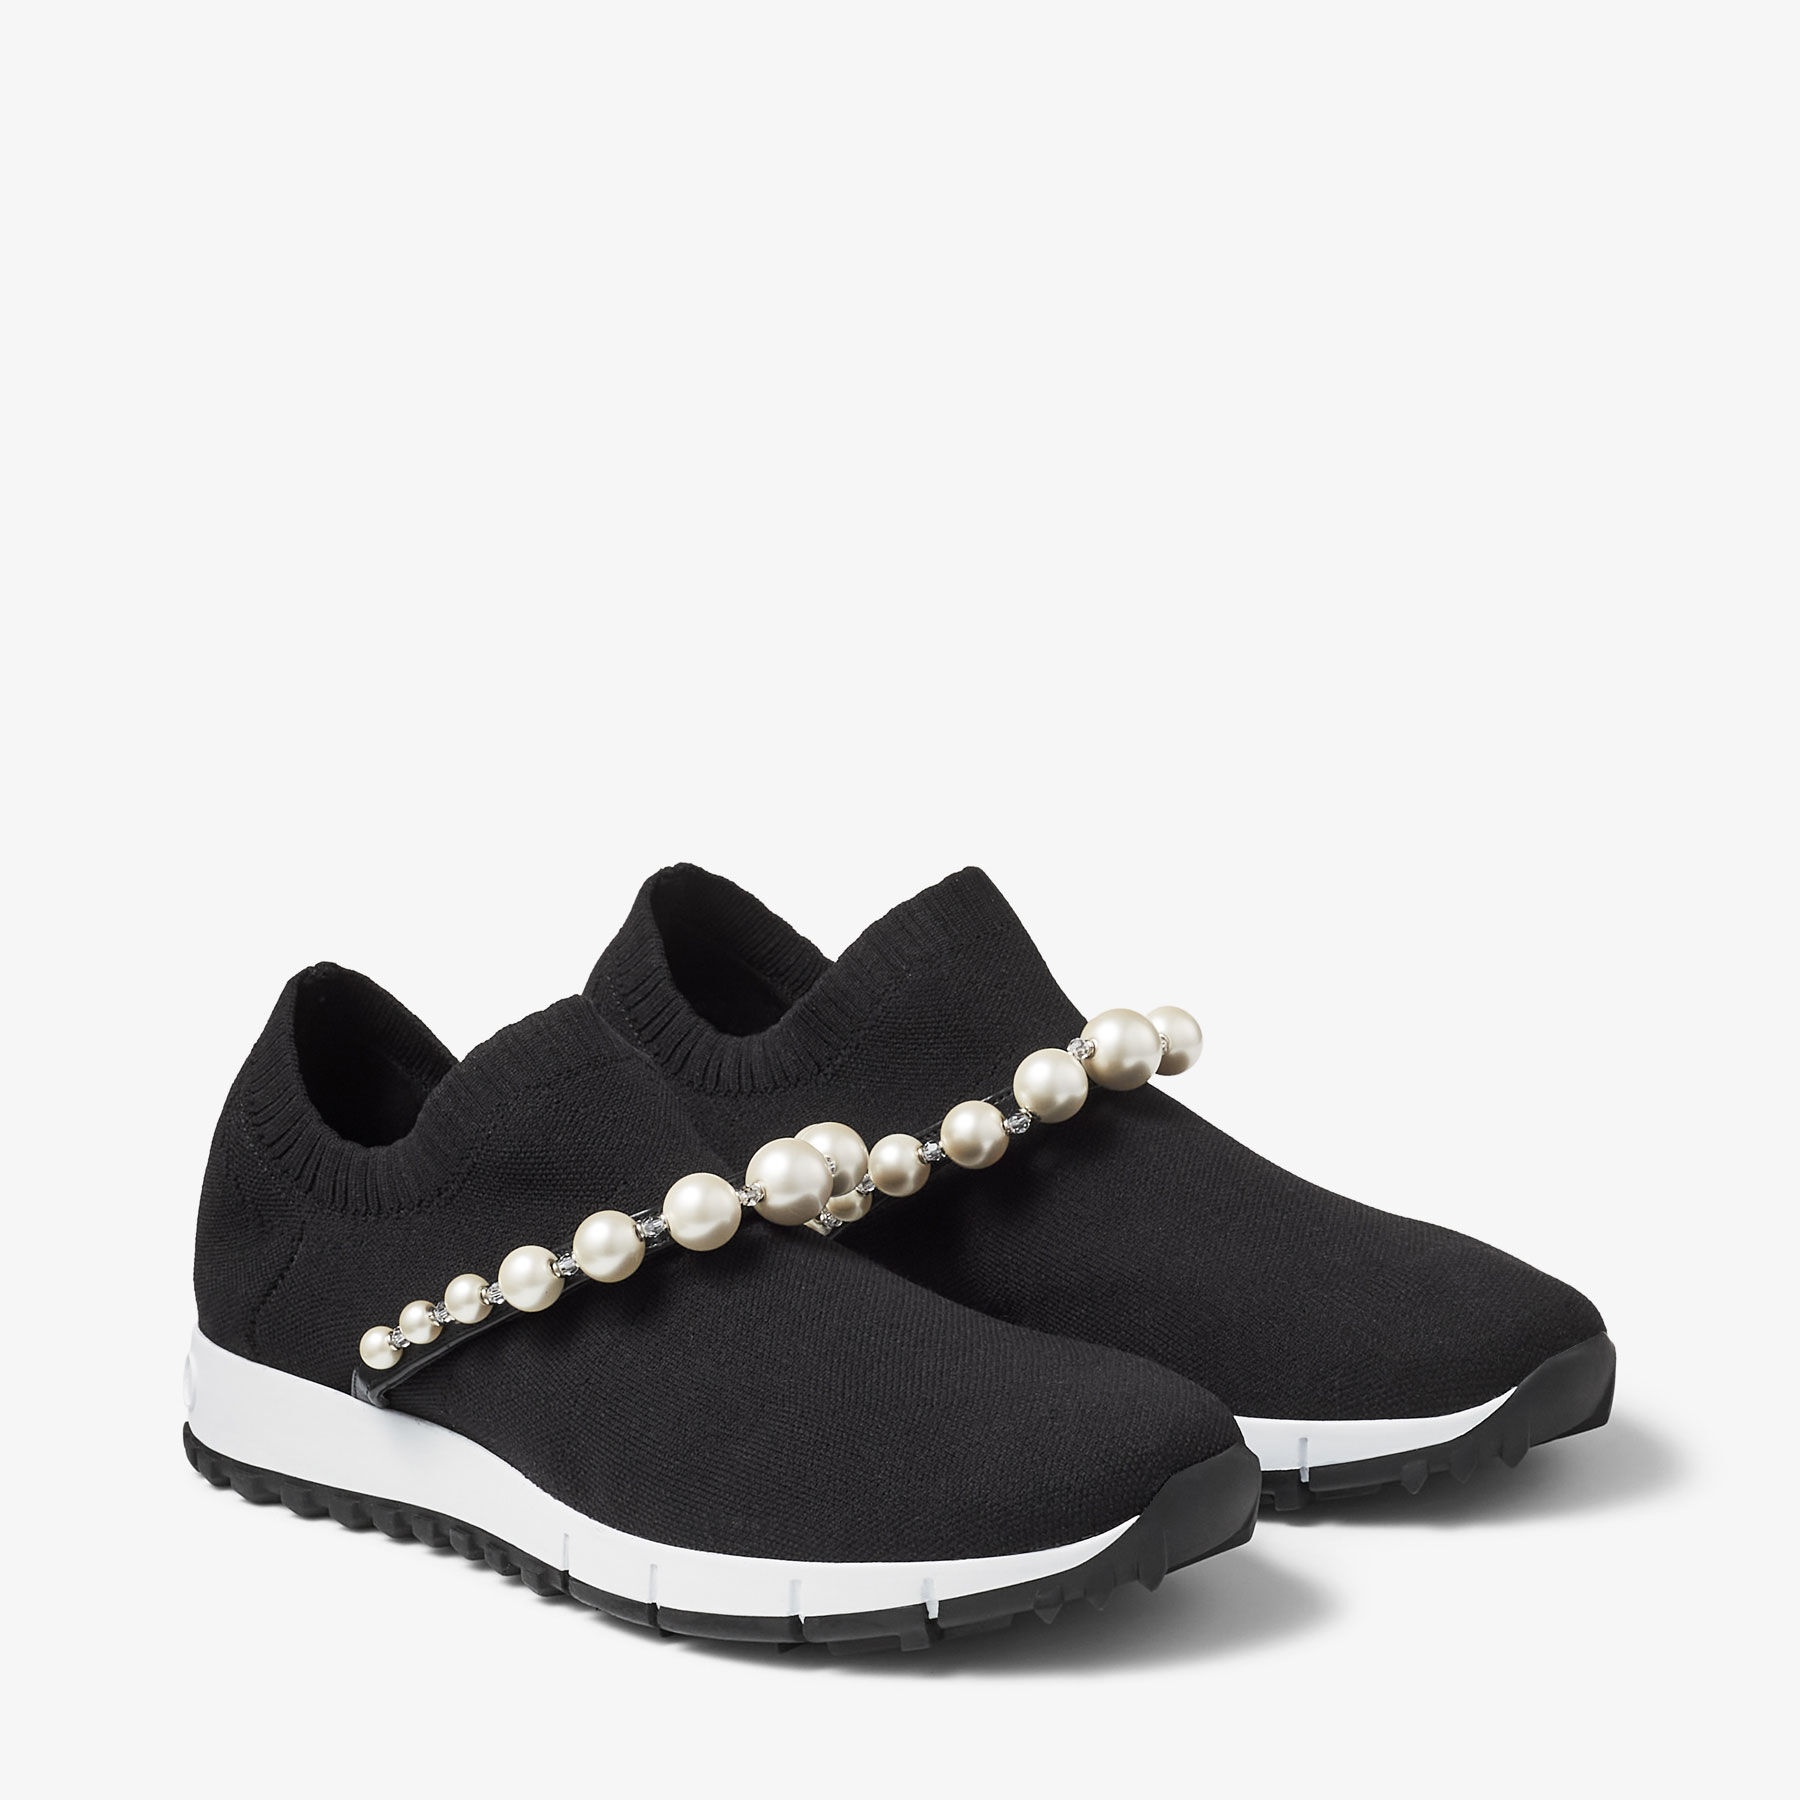 Venice
Black Knit Trainers with Pearls - 3